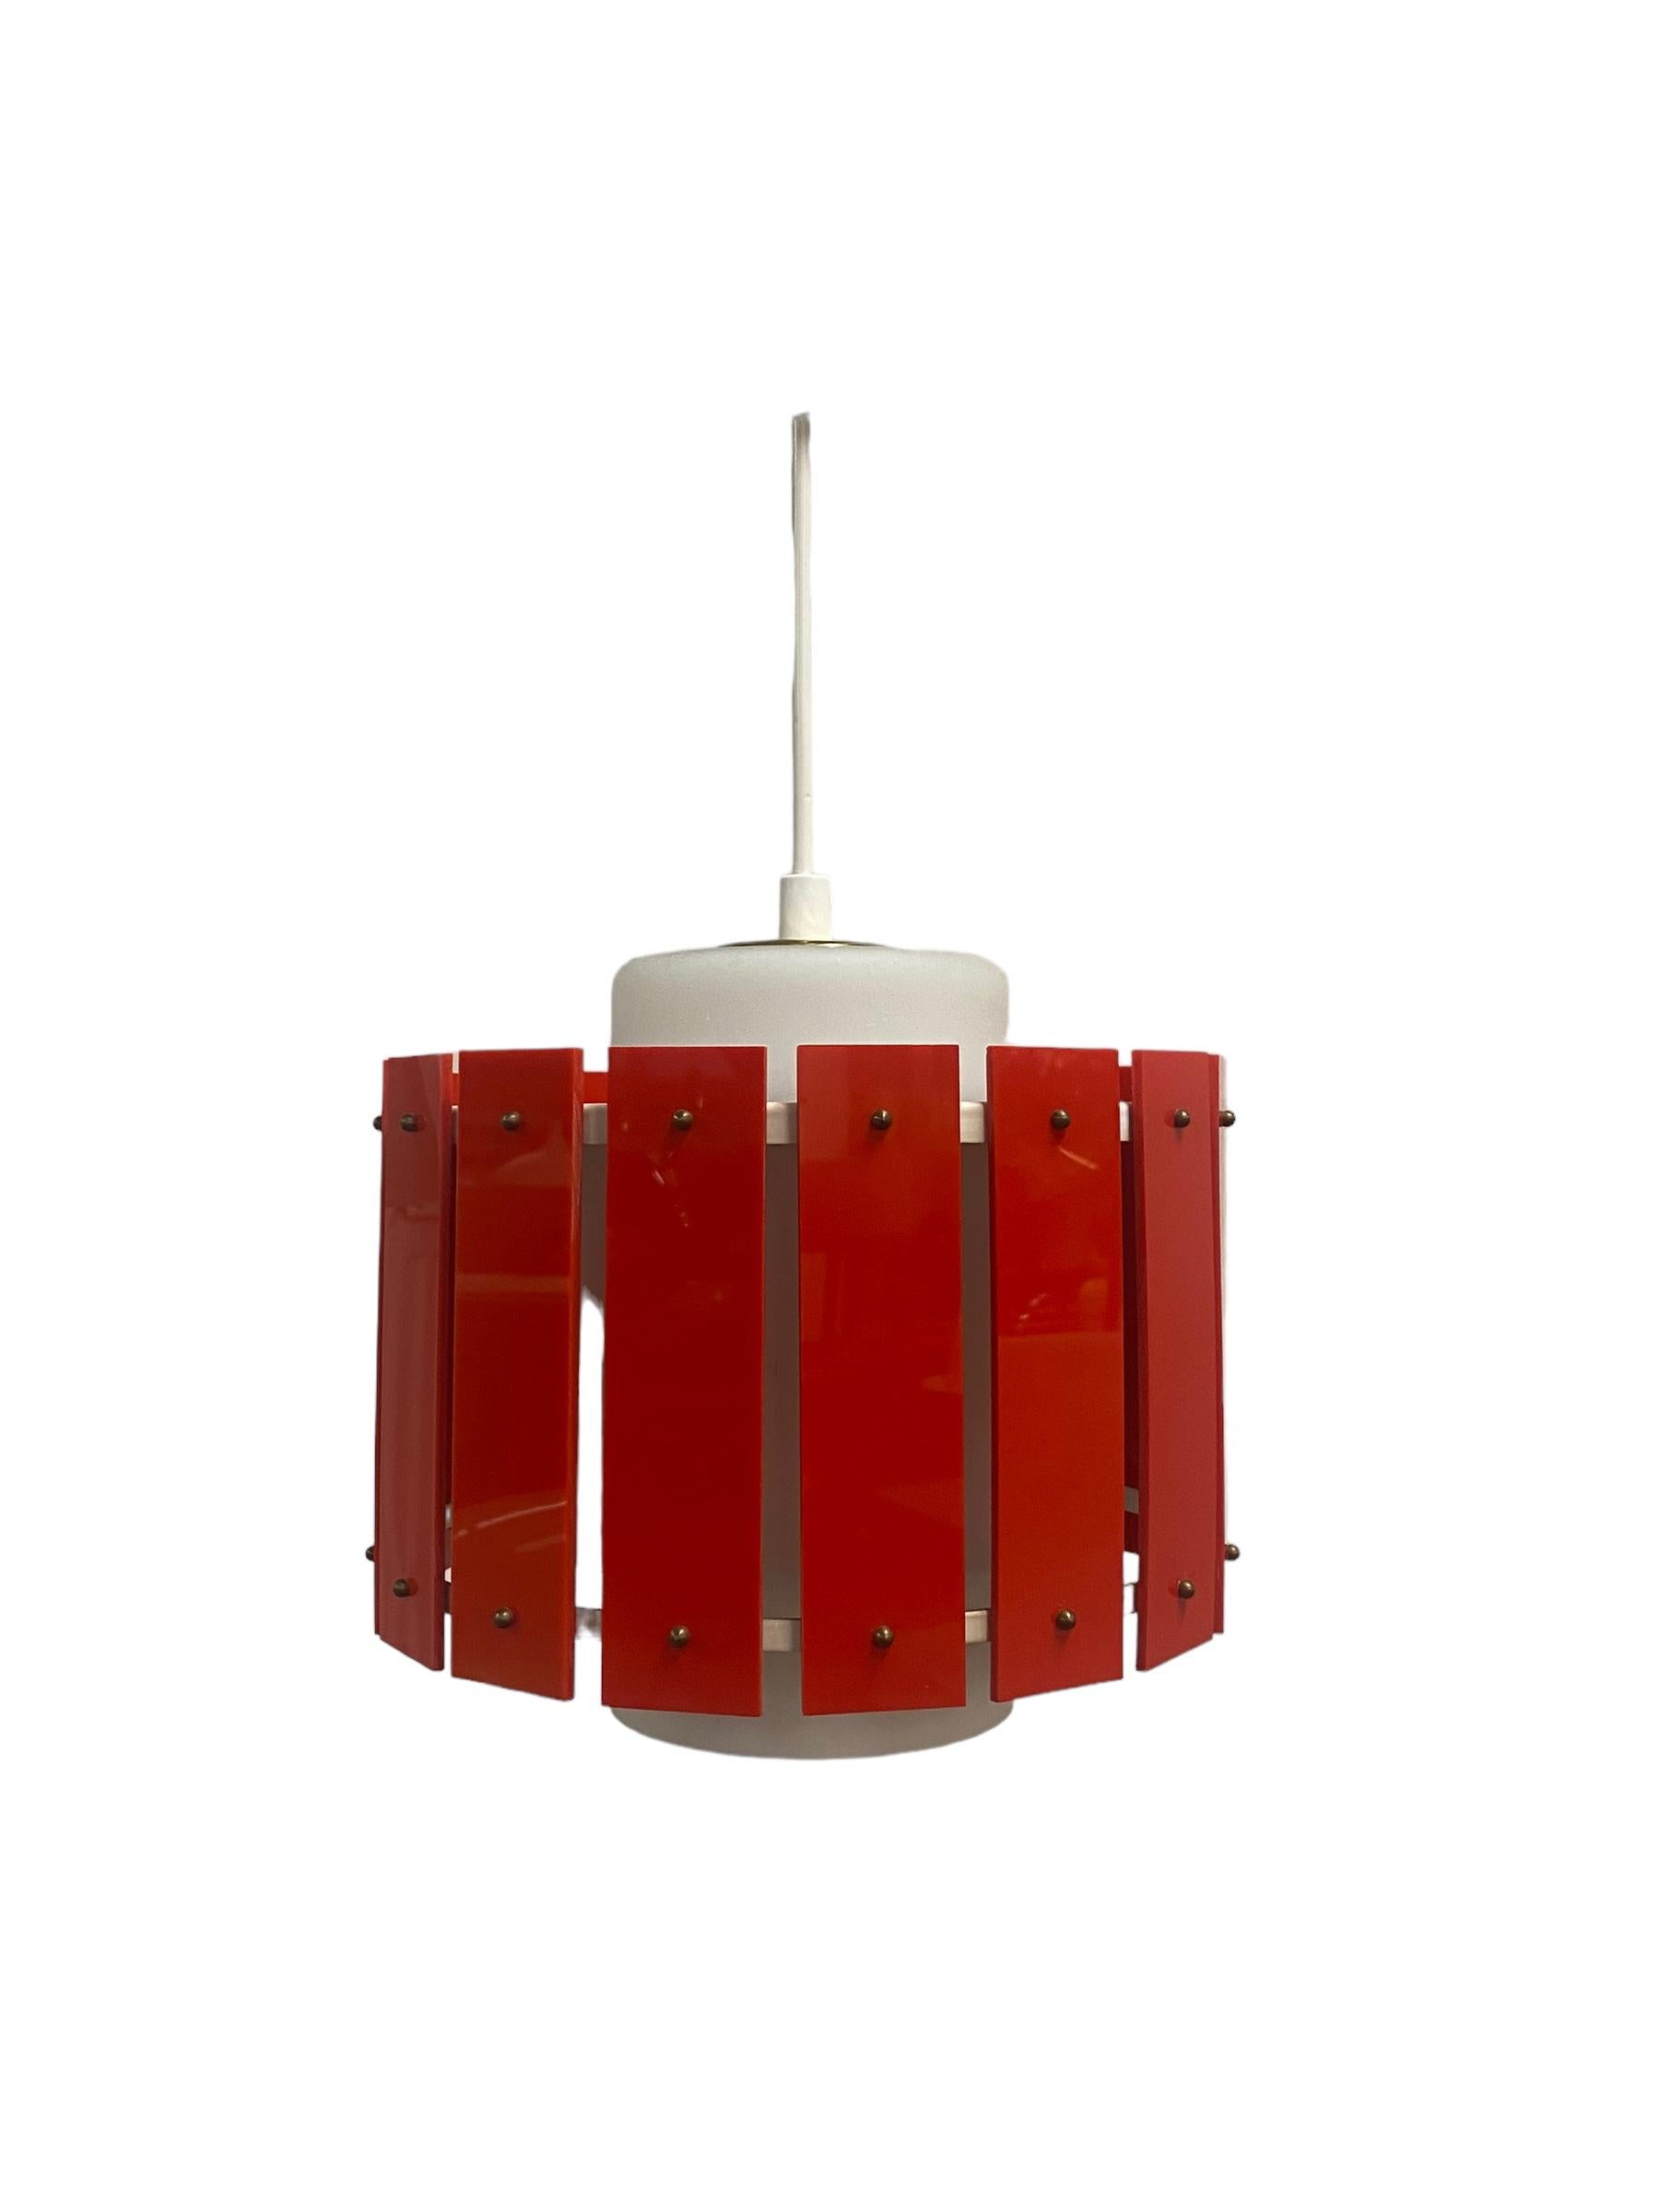 A Red Ceiling Pendant Model K2-47 by Maria Lindeman, 1960s For Sale 2